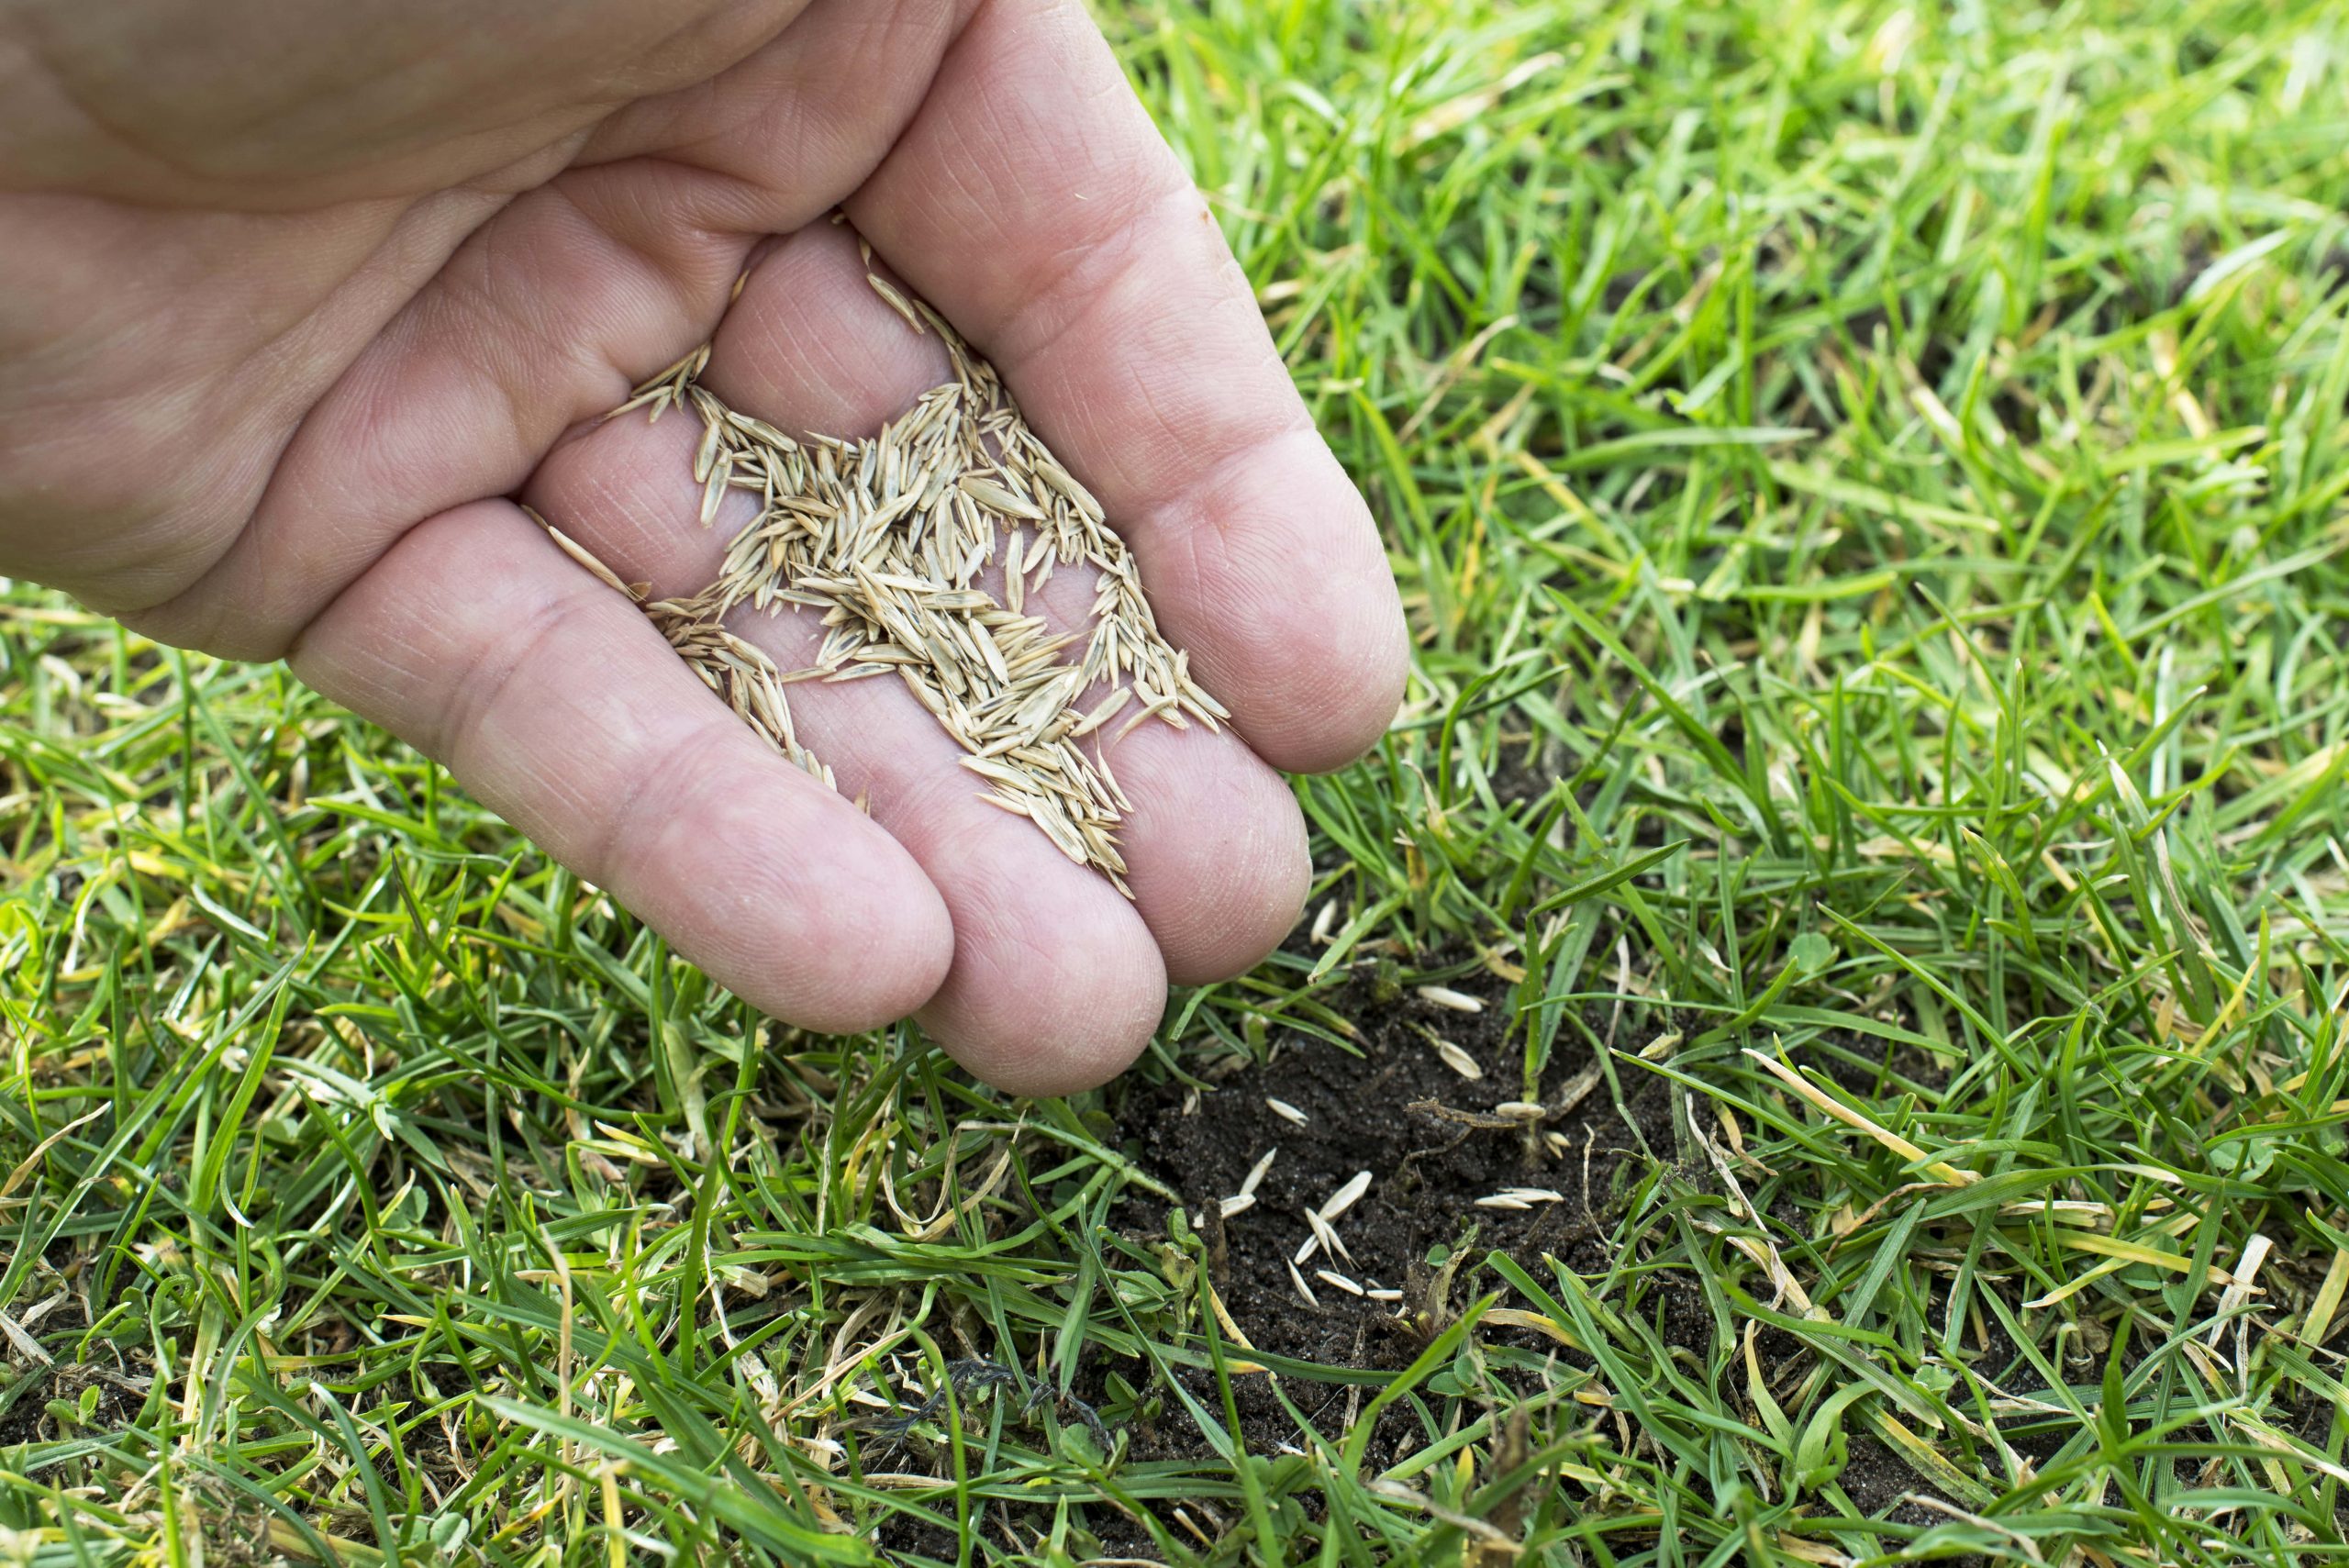 Person scattering grass seeds by hand.